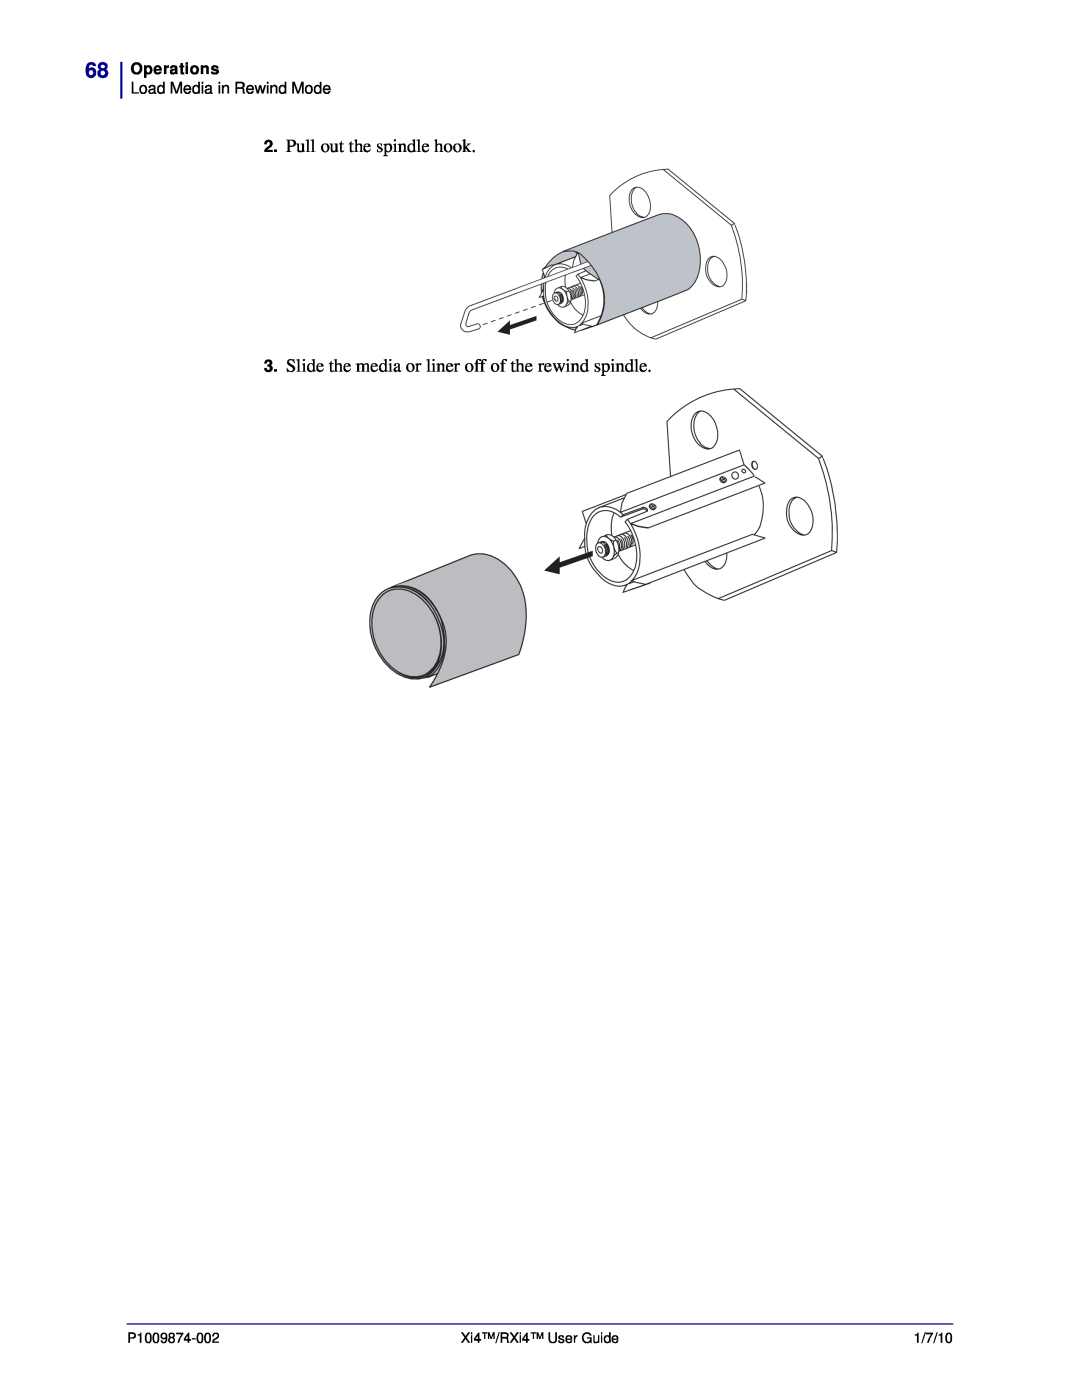 Zebra Technologies 17080100200 Pull out the spindle hook, Slide the media or liner off of the rewind spindle, Operations 